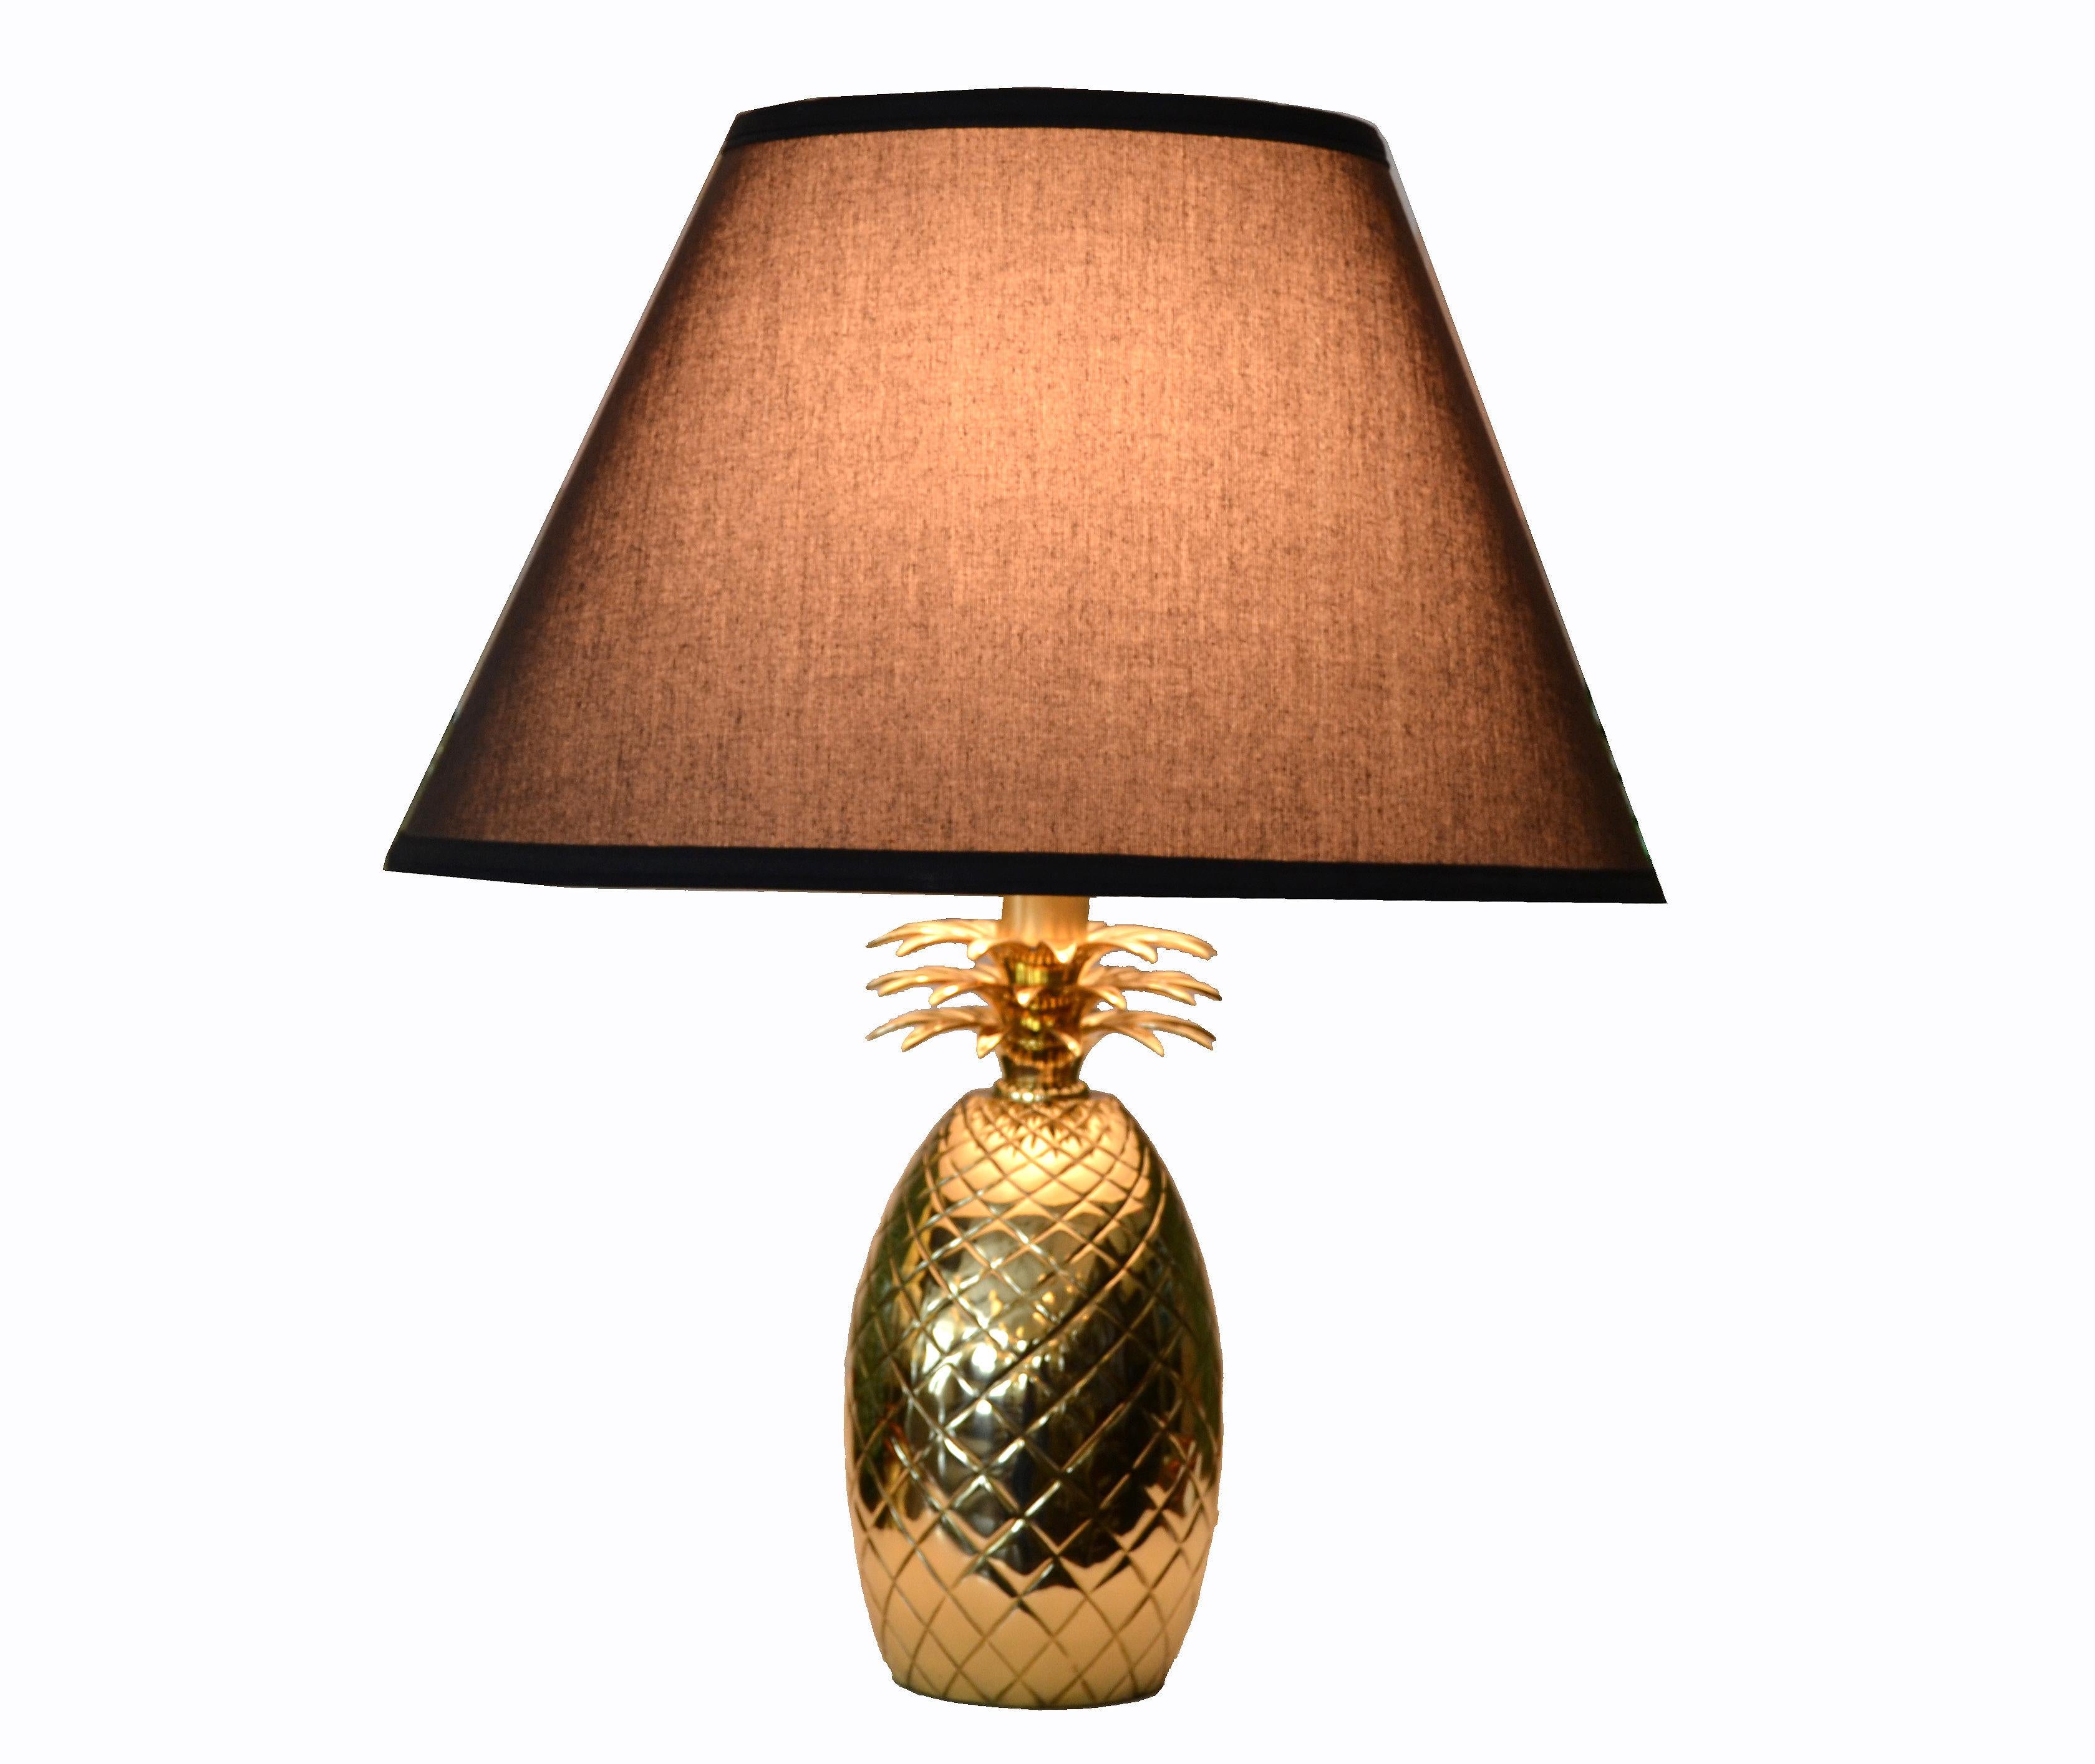 Heavy Hollywood Regency sculptural bronze pineapple table lamp with harp and finial.
Has a felt cover to the base.
Wired for the U.S. with perfect working 3-way function.
No shade.